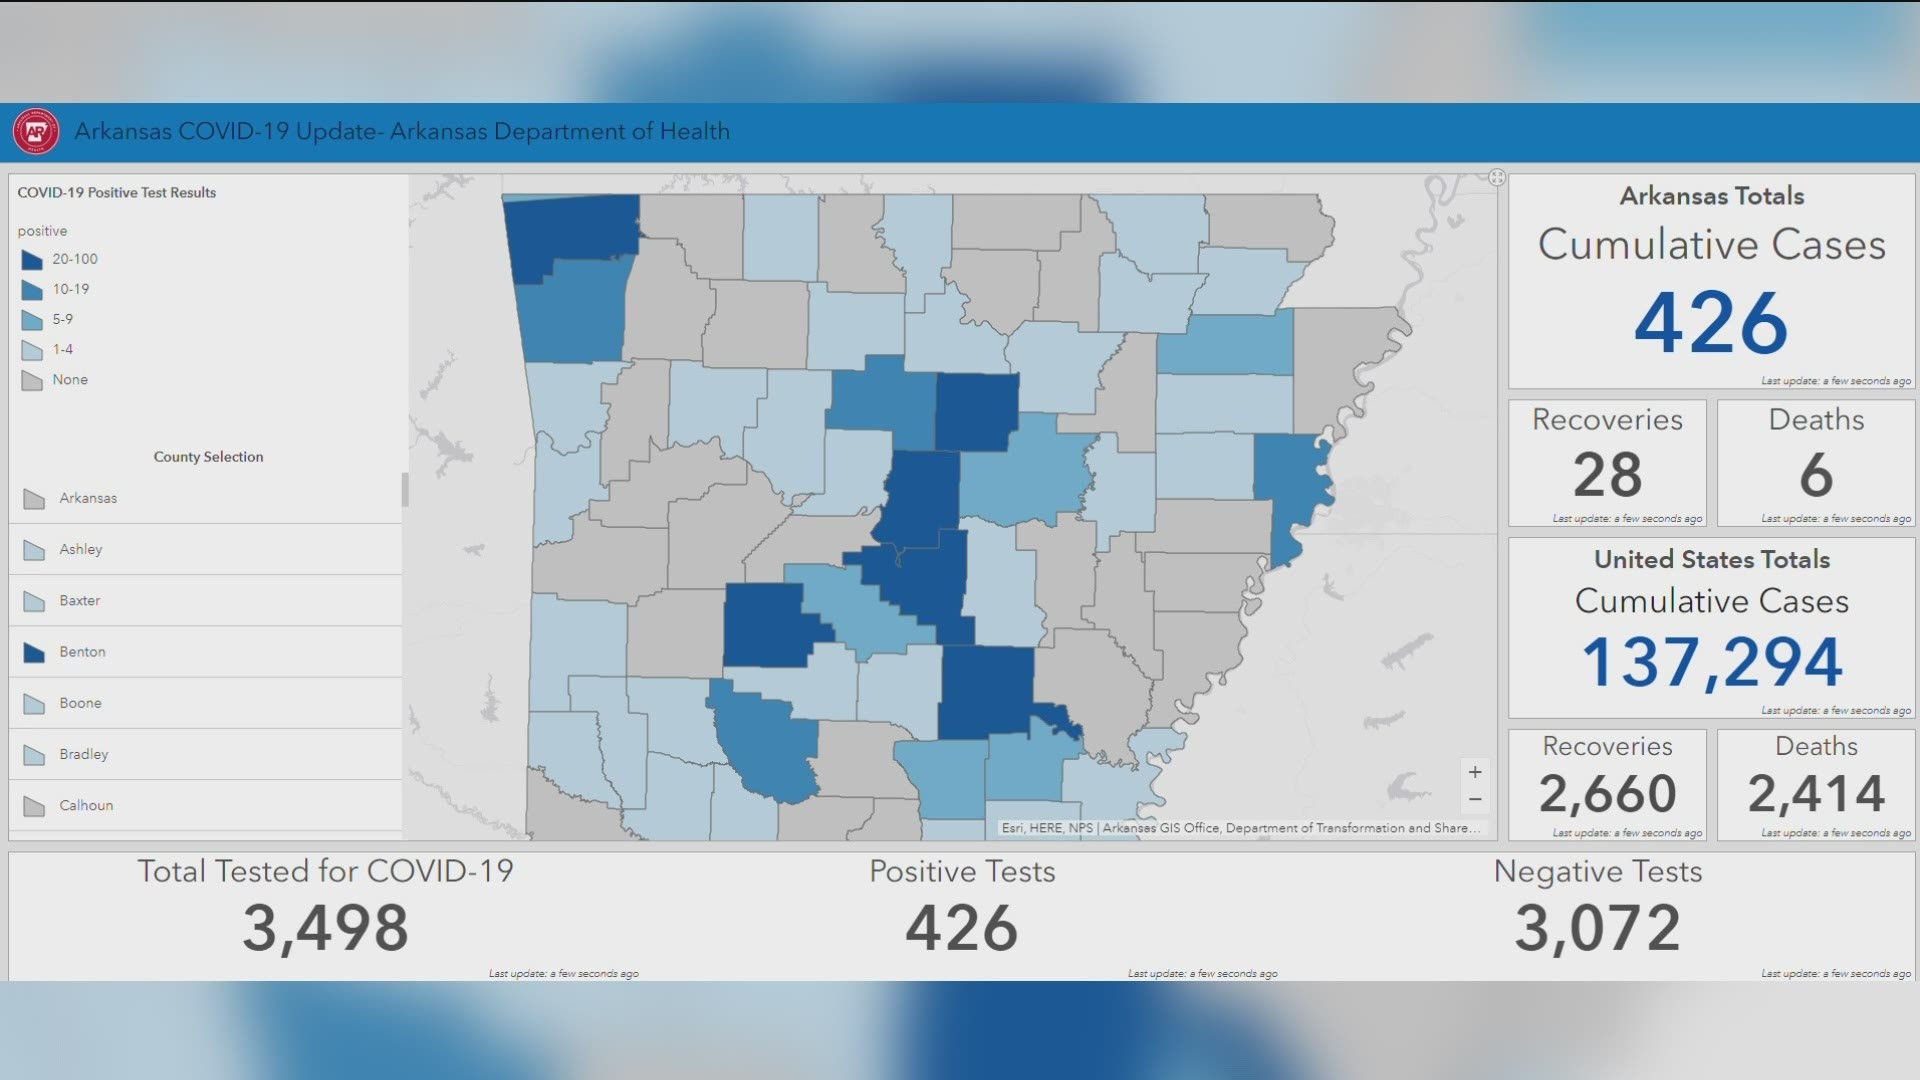 Real-time updates: Over 400 confirmed coronavirus cases, 6 deaths in Arkansas.